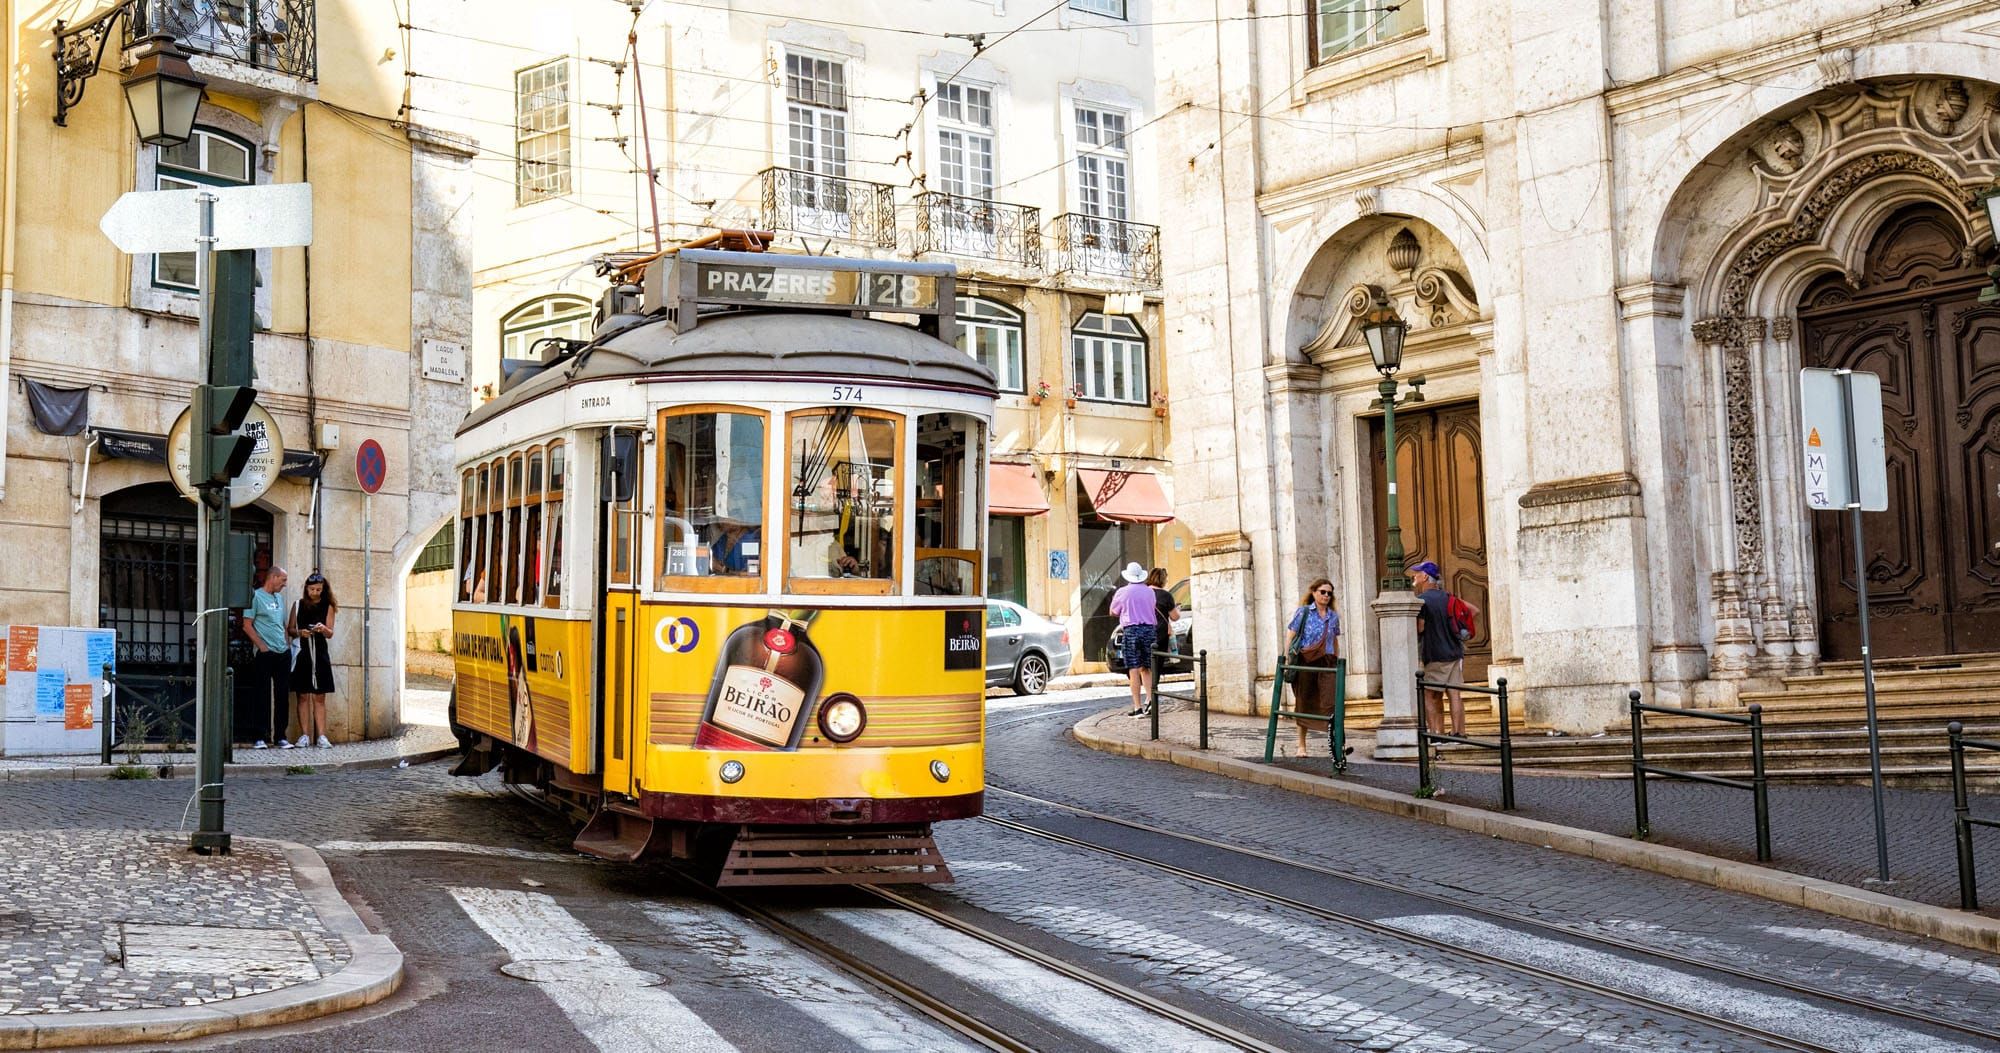 Featured image for “2 Days in Lisbon: How to Plan the Perfect Lisbon Itinerary”